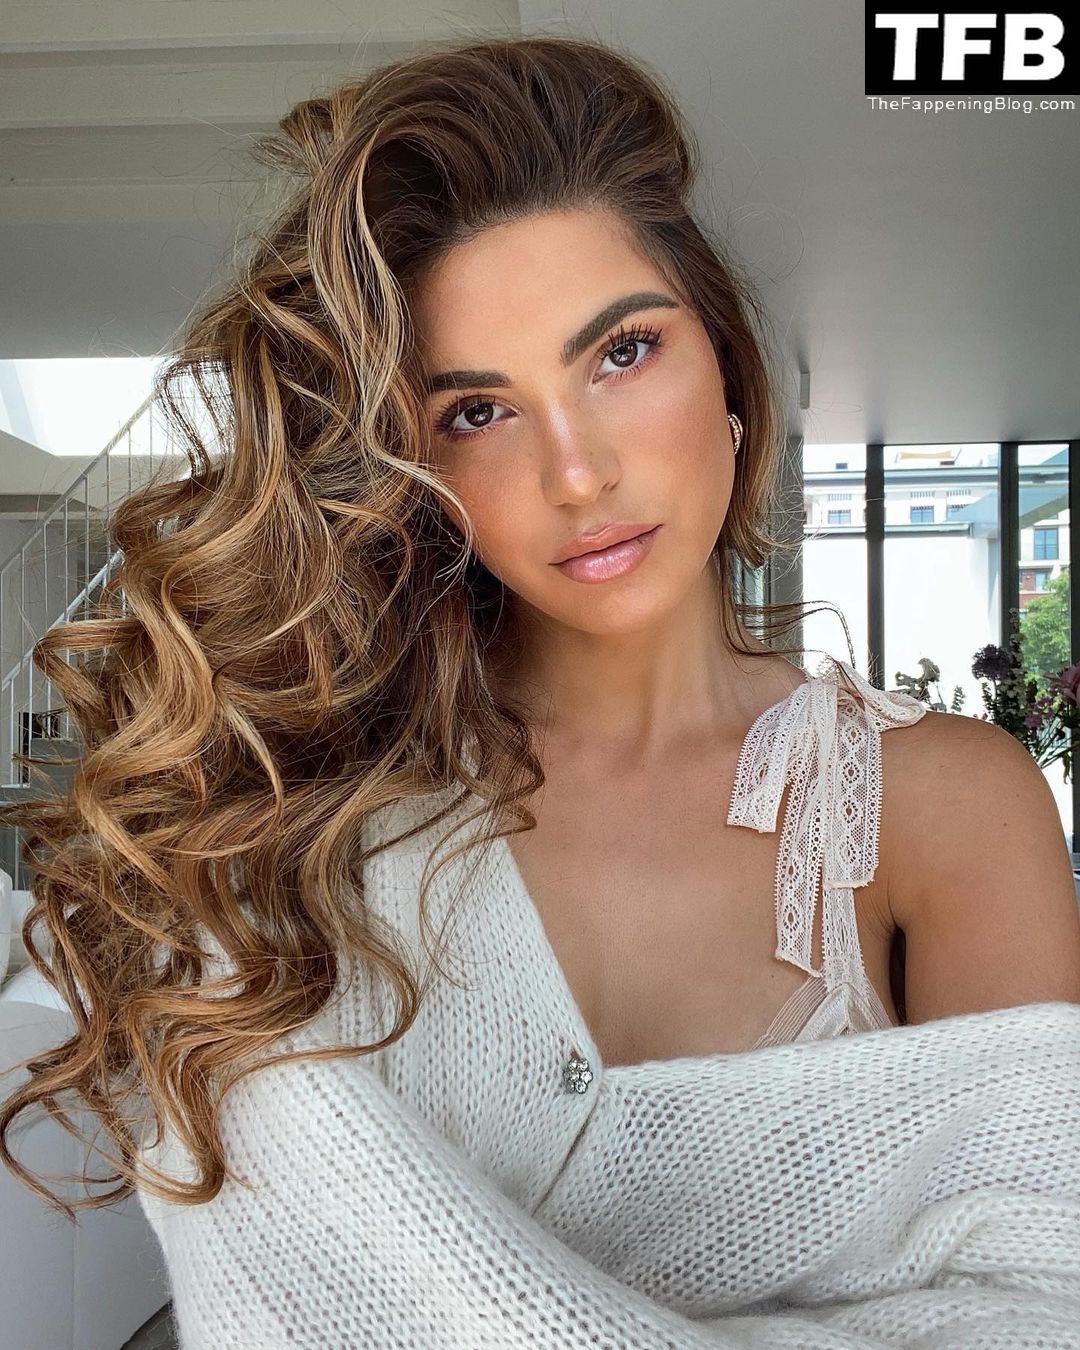 Look at Negin Mirsalehi’s nude (covered), bikini, lingerie, outfit photos f...